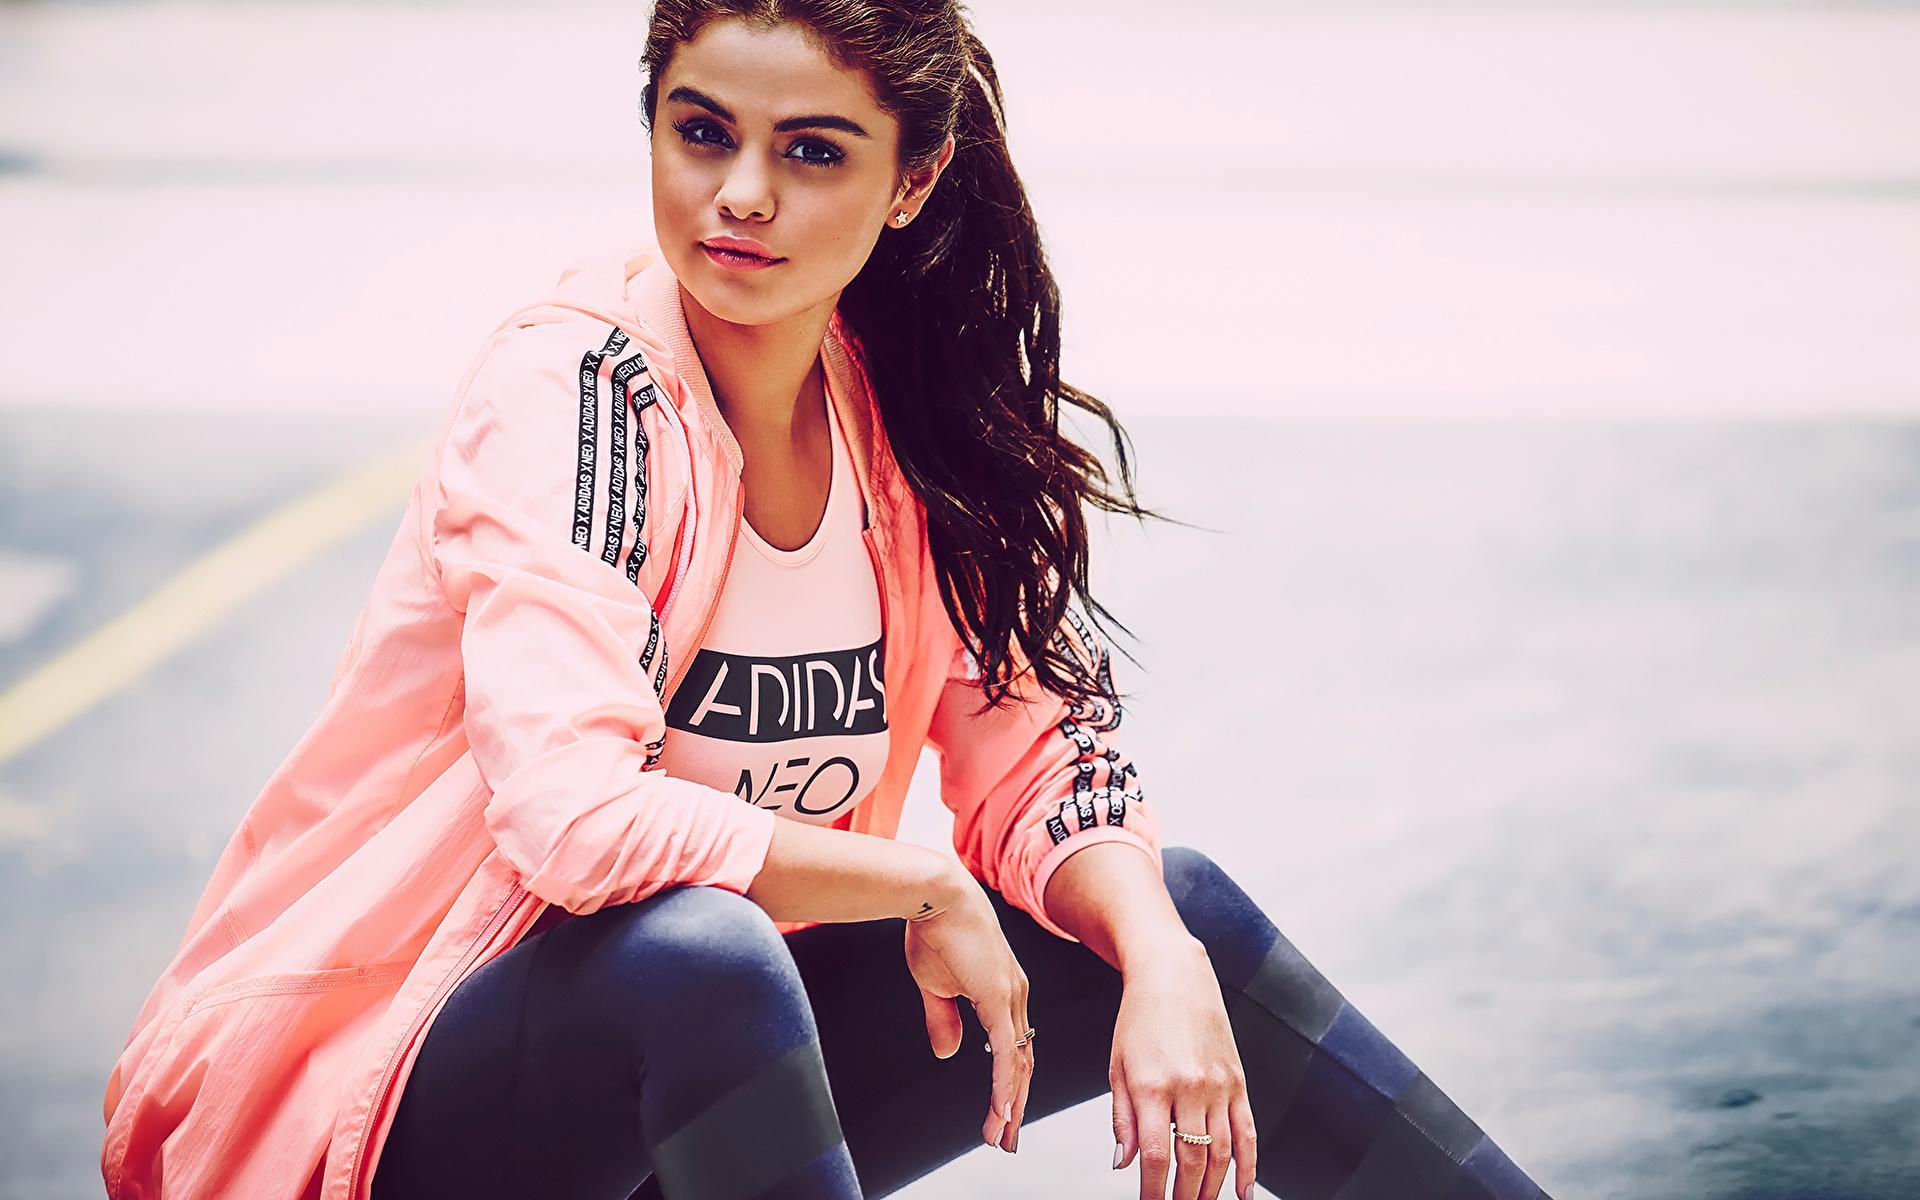 Download Adidas Girl Wallpaper Wallpaper For your screen